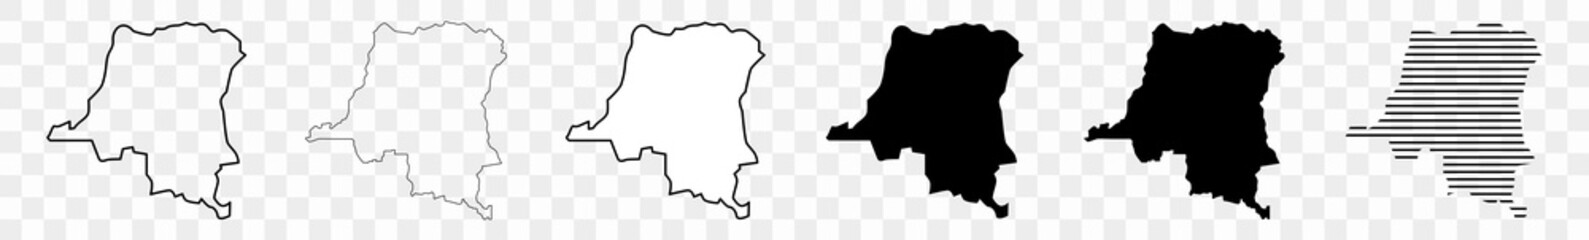 Democratic Republic of the Congo Map Black | Congolese Border | State Country | Transparent Isolated | Variations